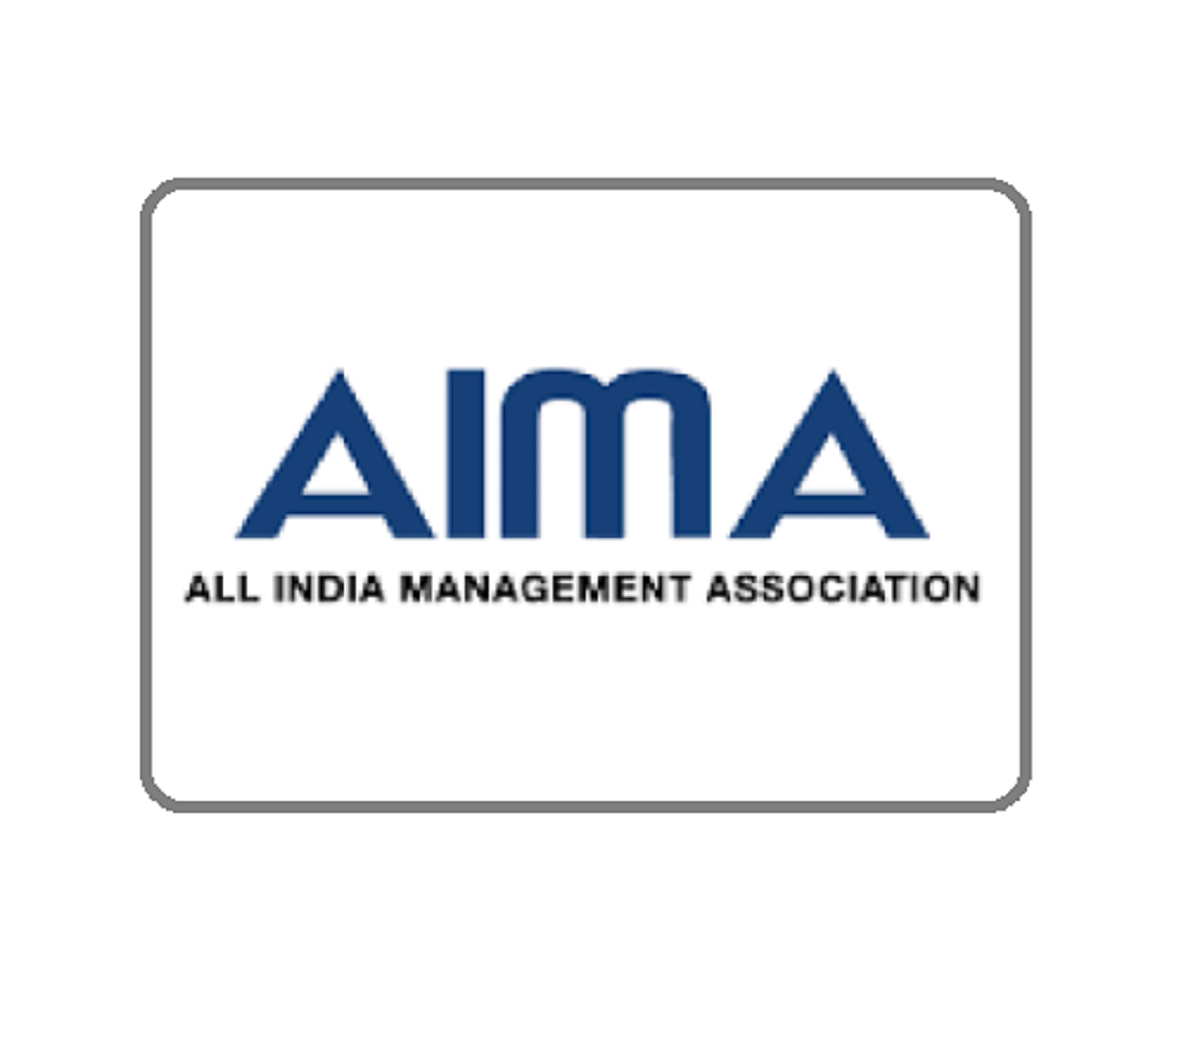 AIMA MAT CBT Admit Card 2019 Released, Download Here